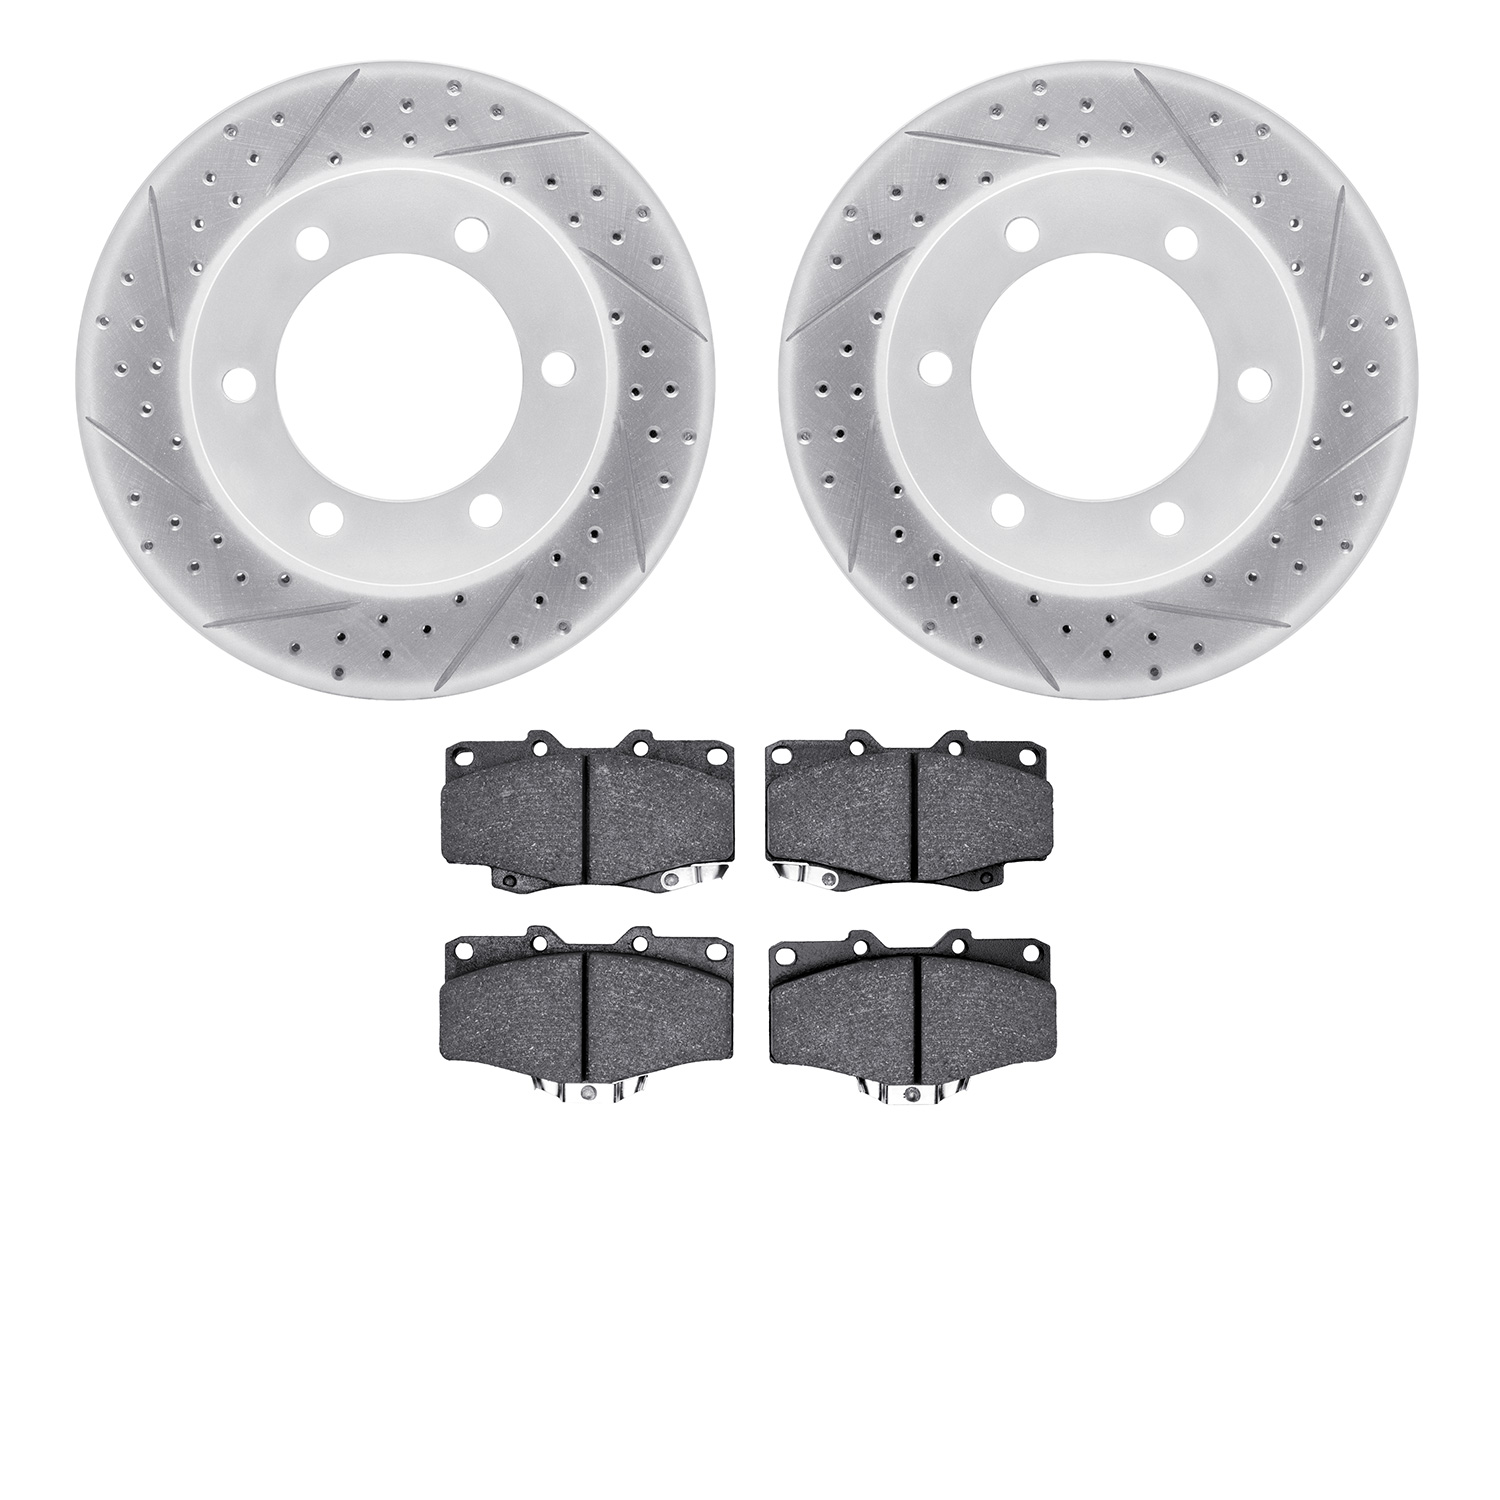 2402-76005 Geoperformance Drilled/Slotted Brake Rotors with Ultimate-Duty Brake Pads Kit, 1995-2004 Lexus/Toyota/Scion, Position